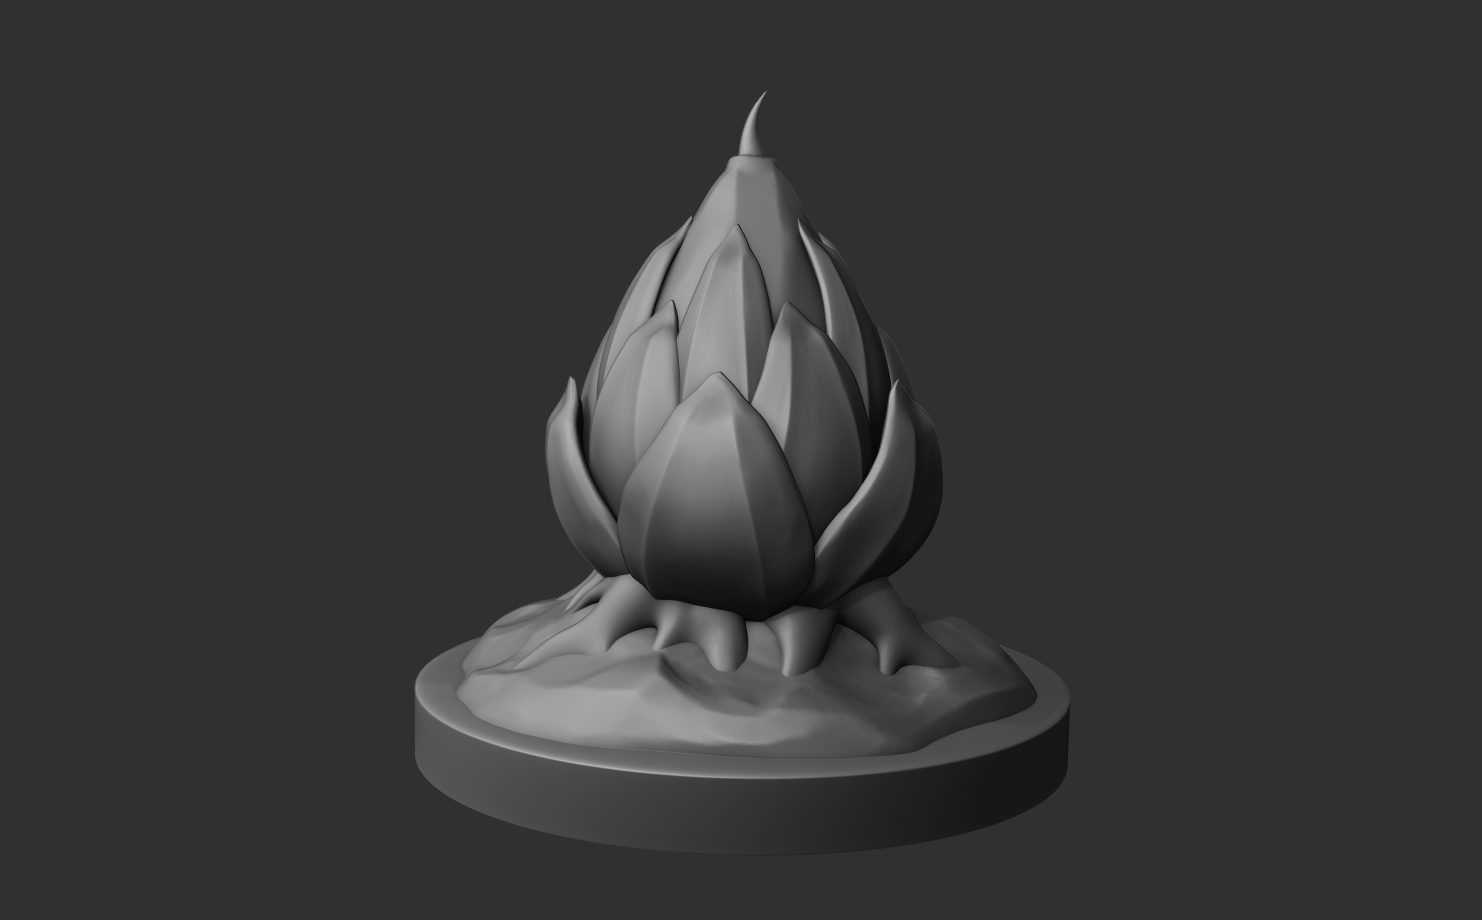 Alien Plant. A 3D model created using ZBrush for the project ‘Alien Life’.